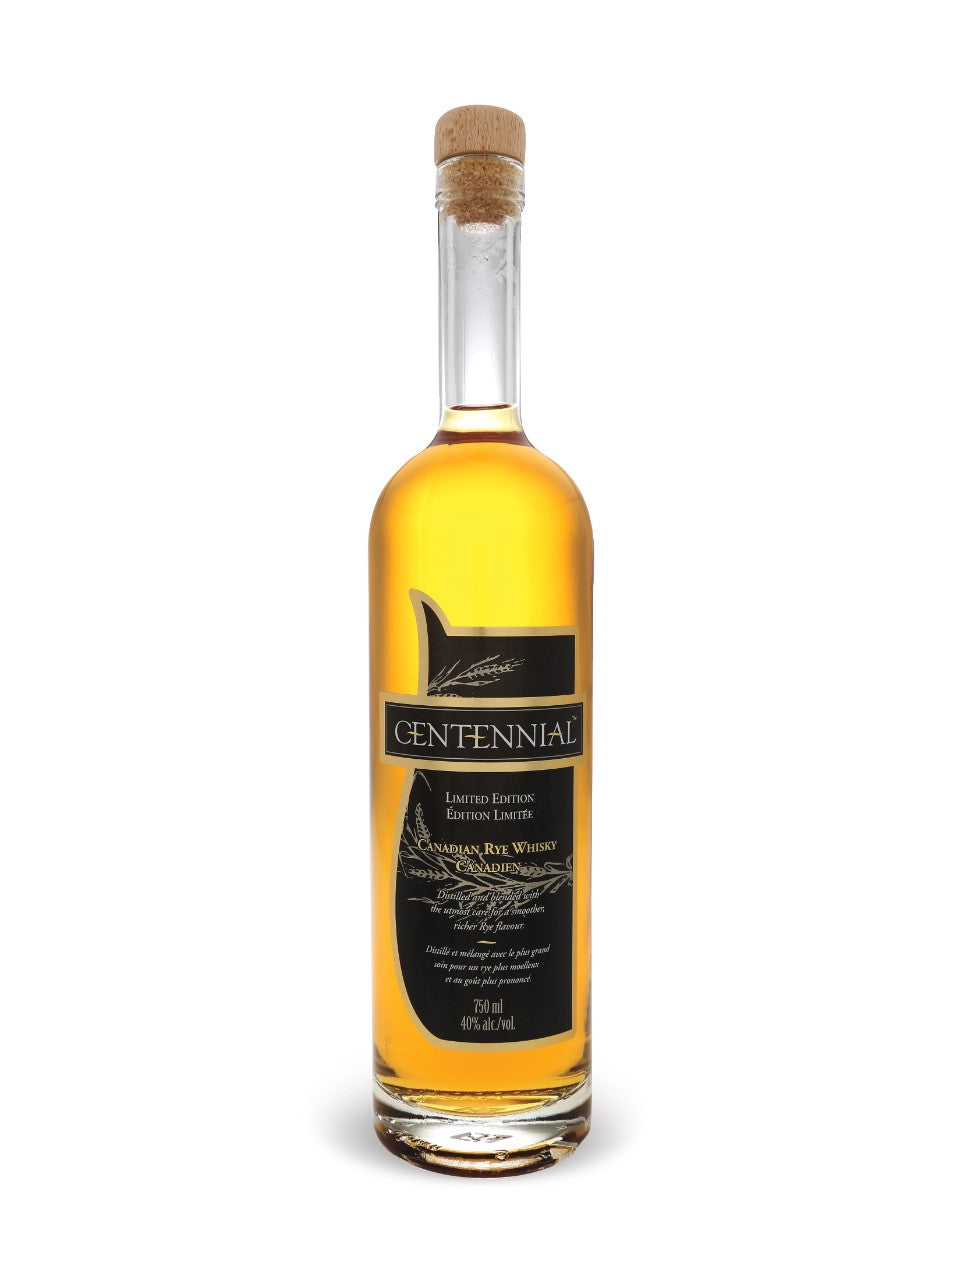 Centennial 10 Year Old Limited Edition Rye 750 mL bottle